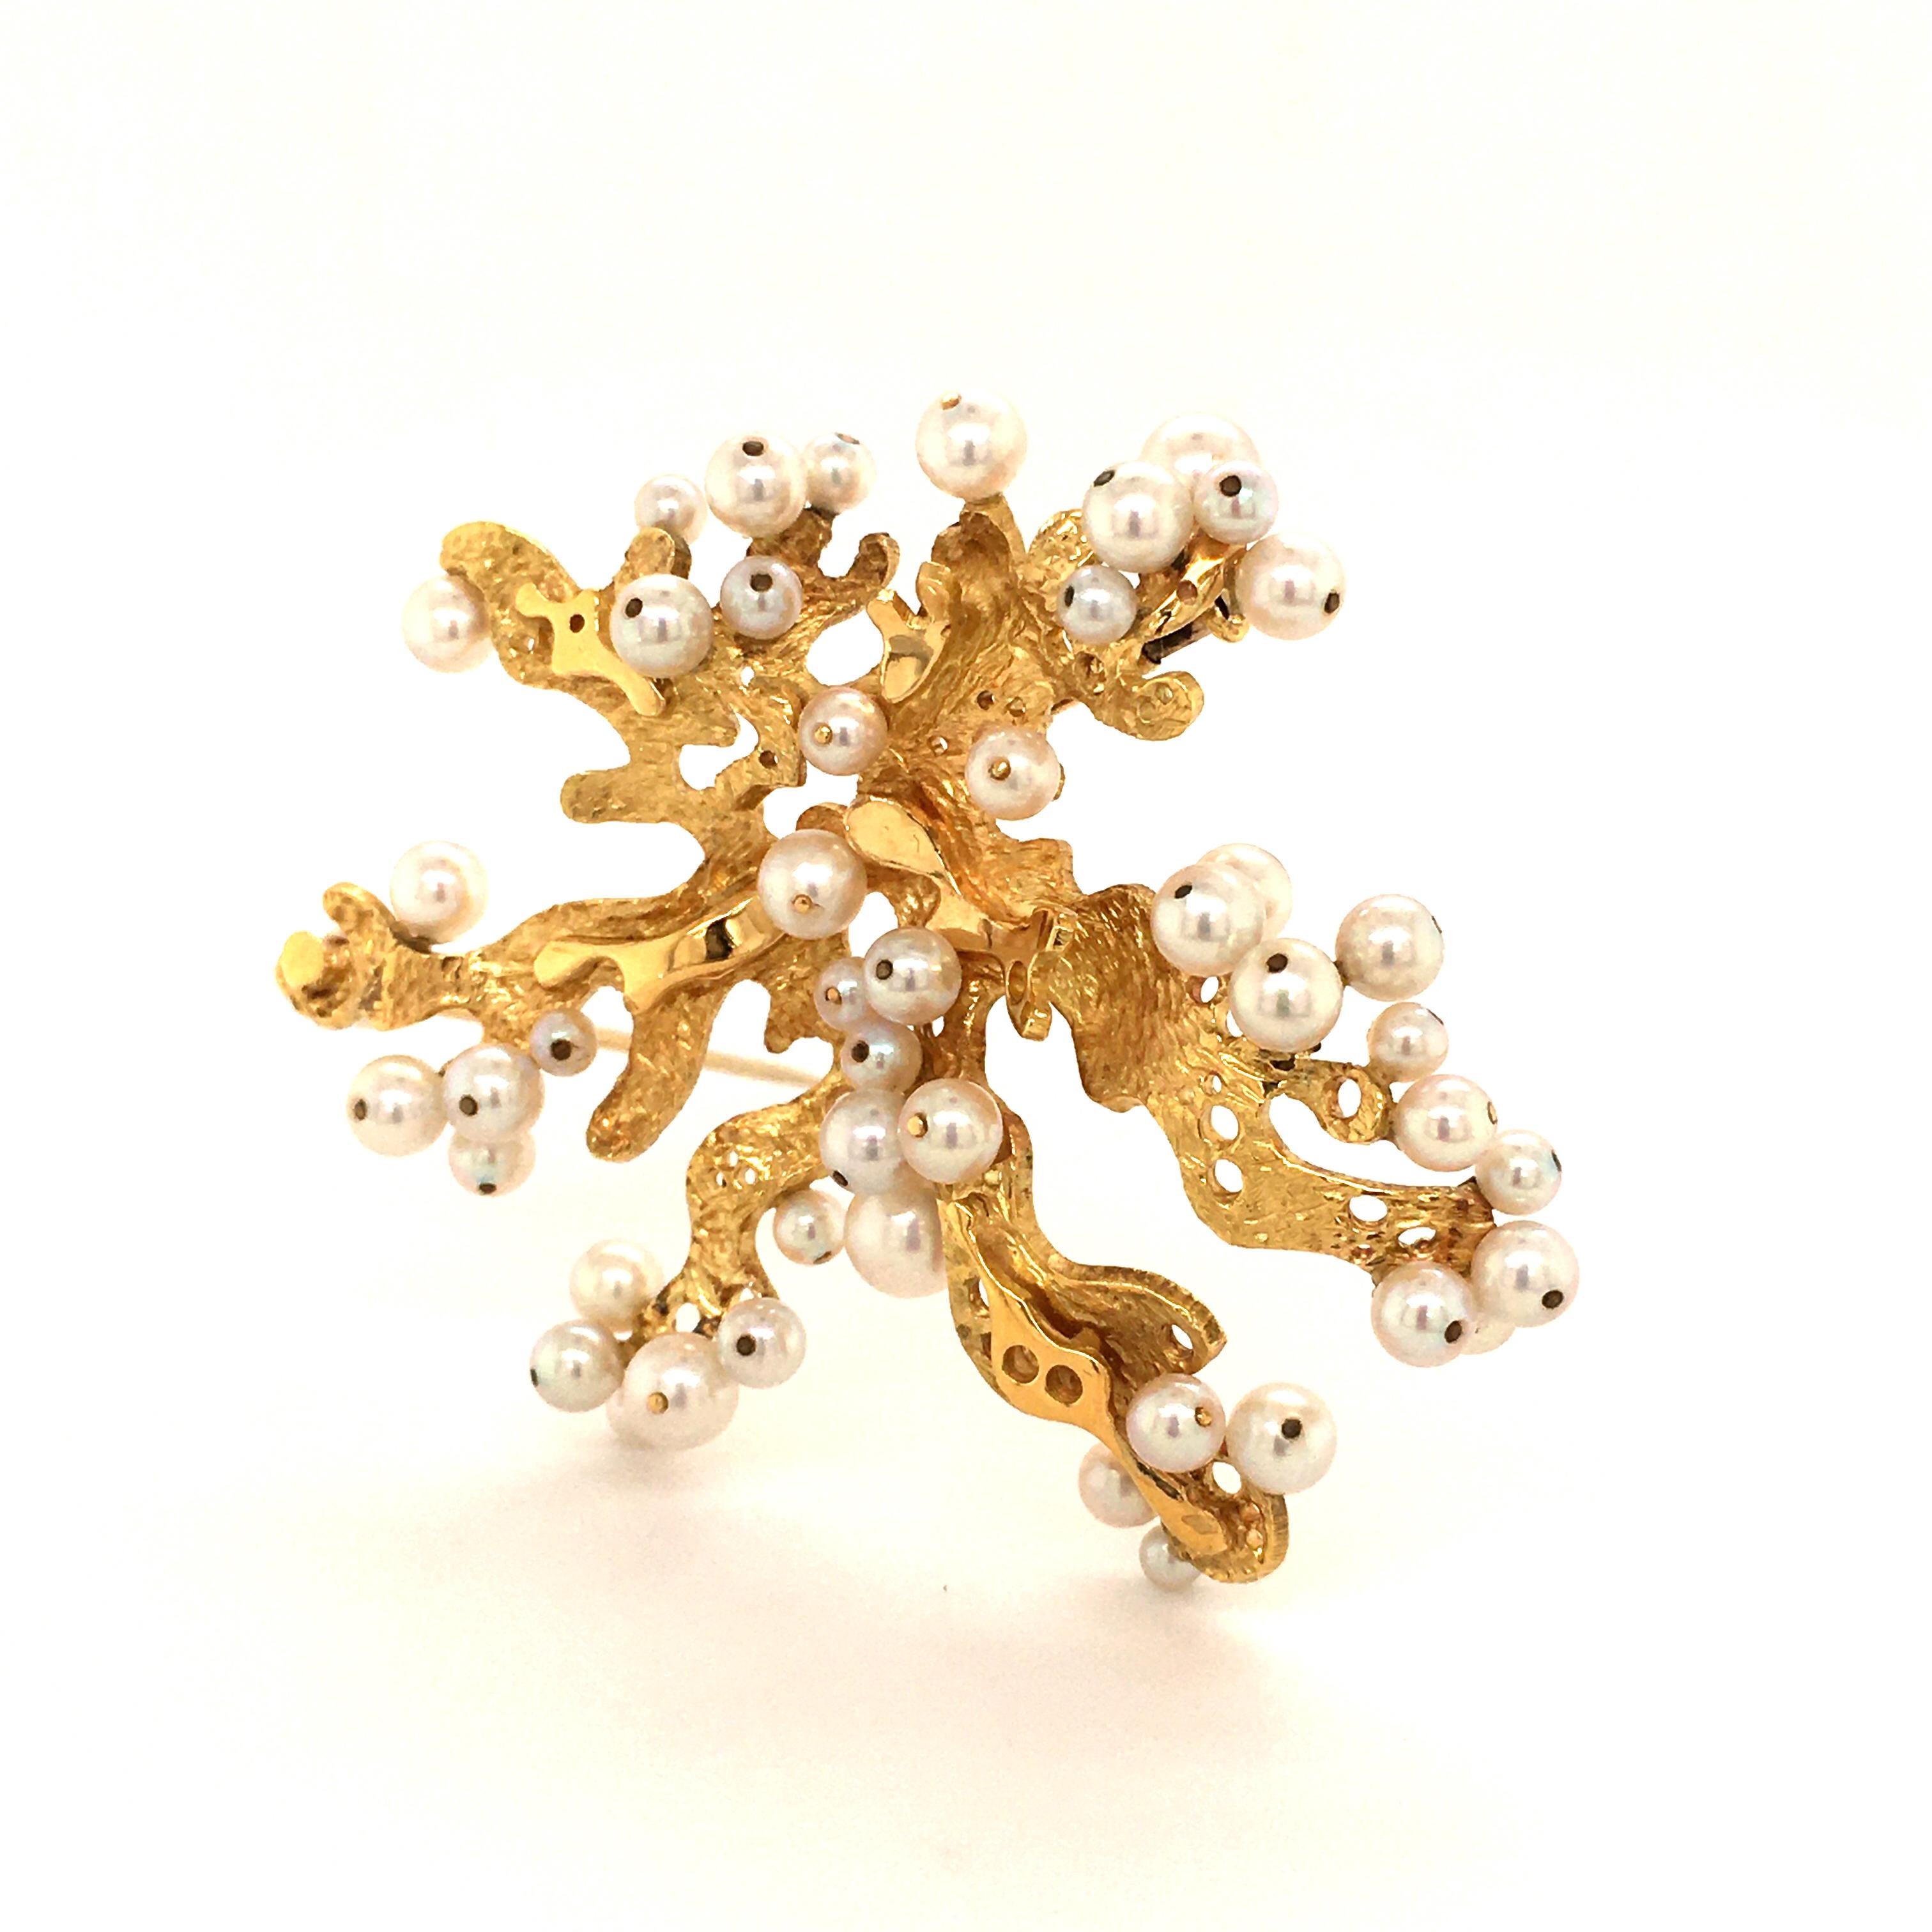 Fancy brooch in yellow gold 750 set with 47 akoya cultured pearls.

Please, ask for additional pictures if you are interested in this item.

Weight: 20.86 grams
Maker's mark: present
Assay mark: 750